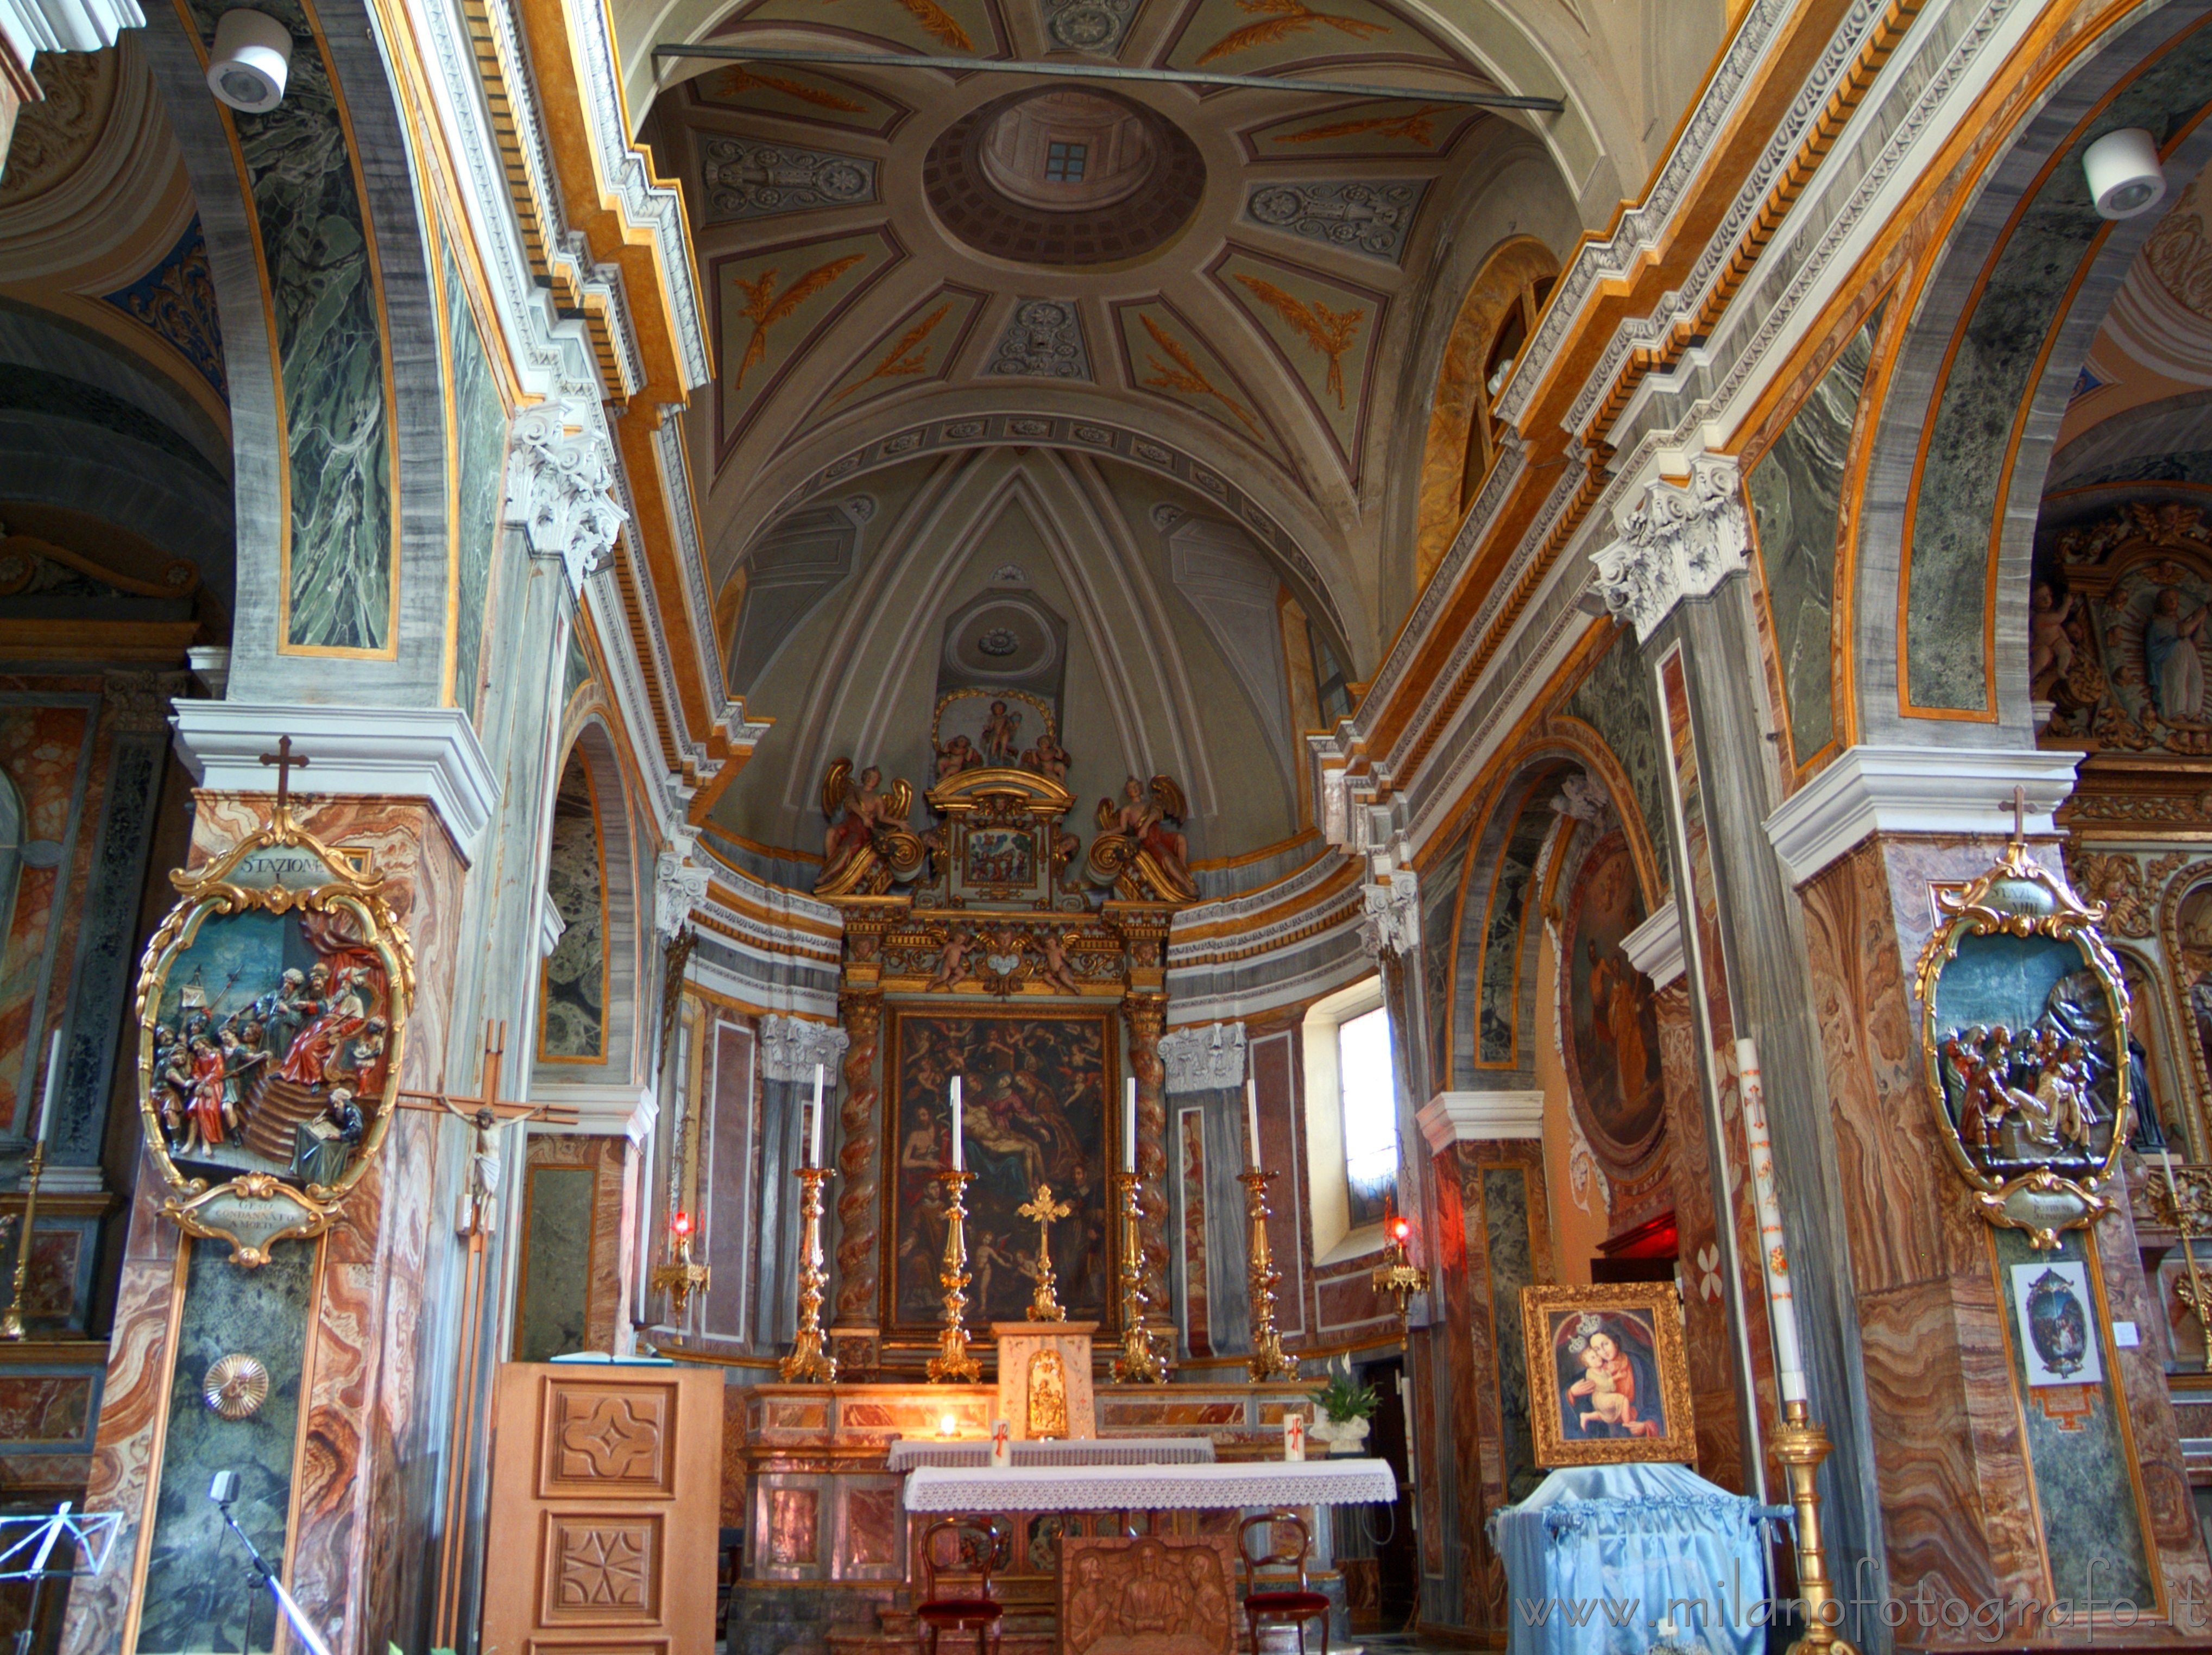 Sagliano Micca (Biella, Italy): Altar and aps of the Church of the Saints Giacomo and  Stefano - Sagliano Micca (Biella, Italy)